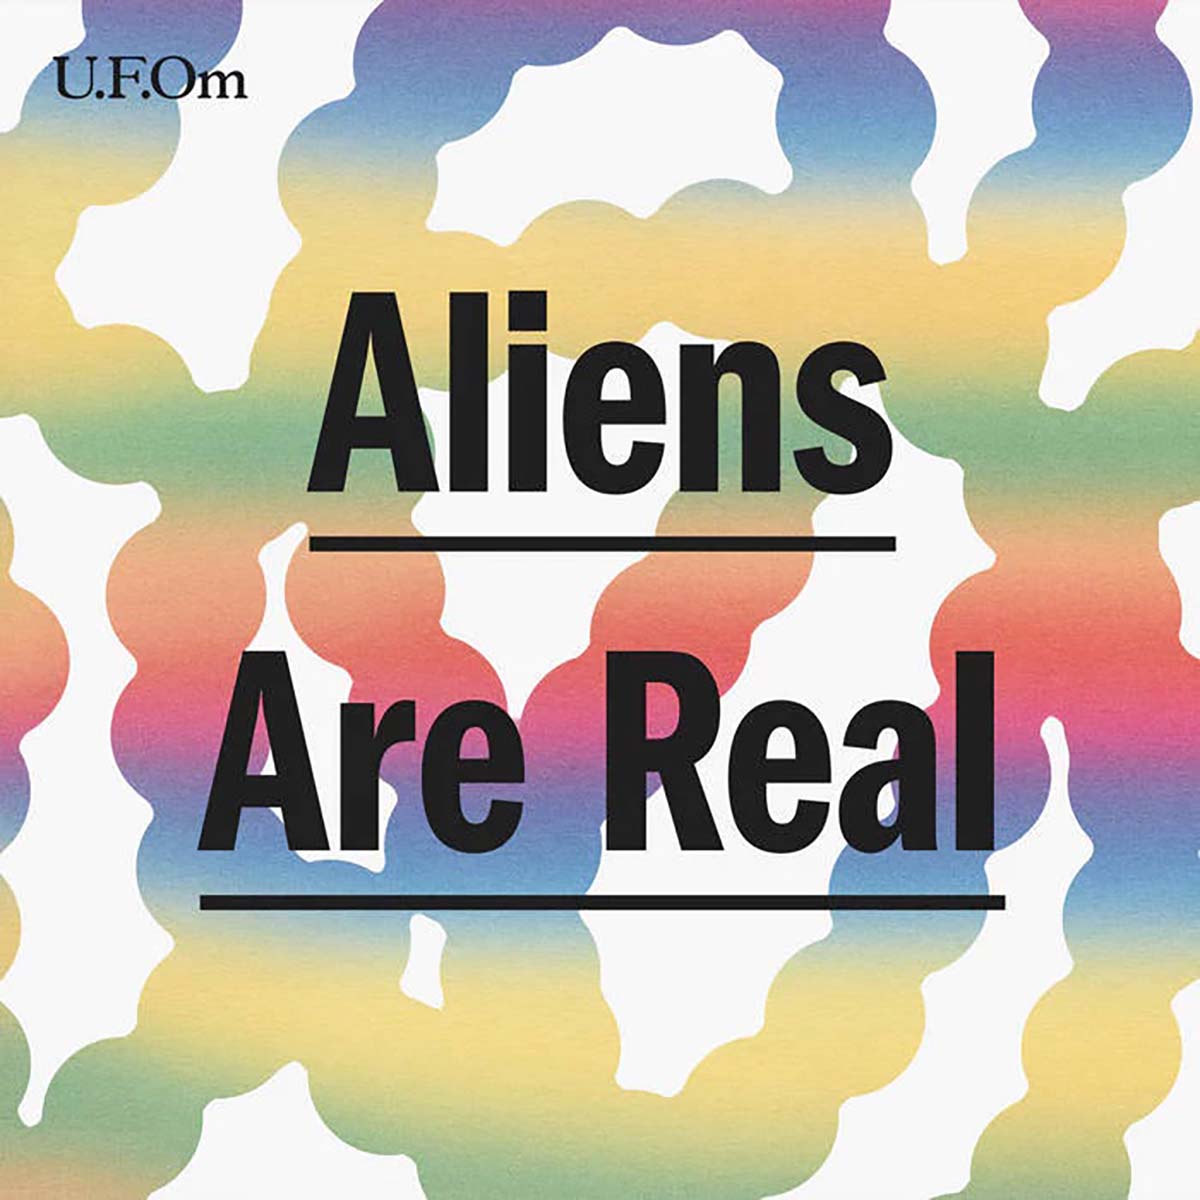 UFOM 'ALIENS ARE REAL'